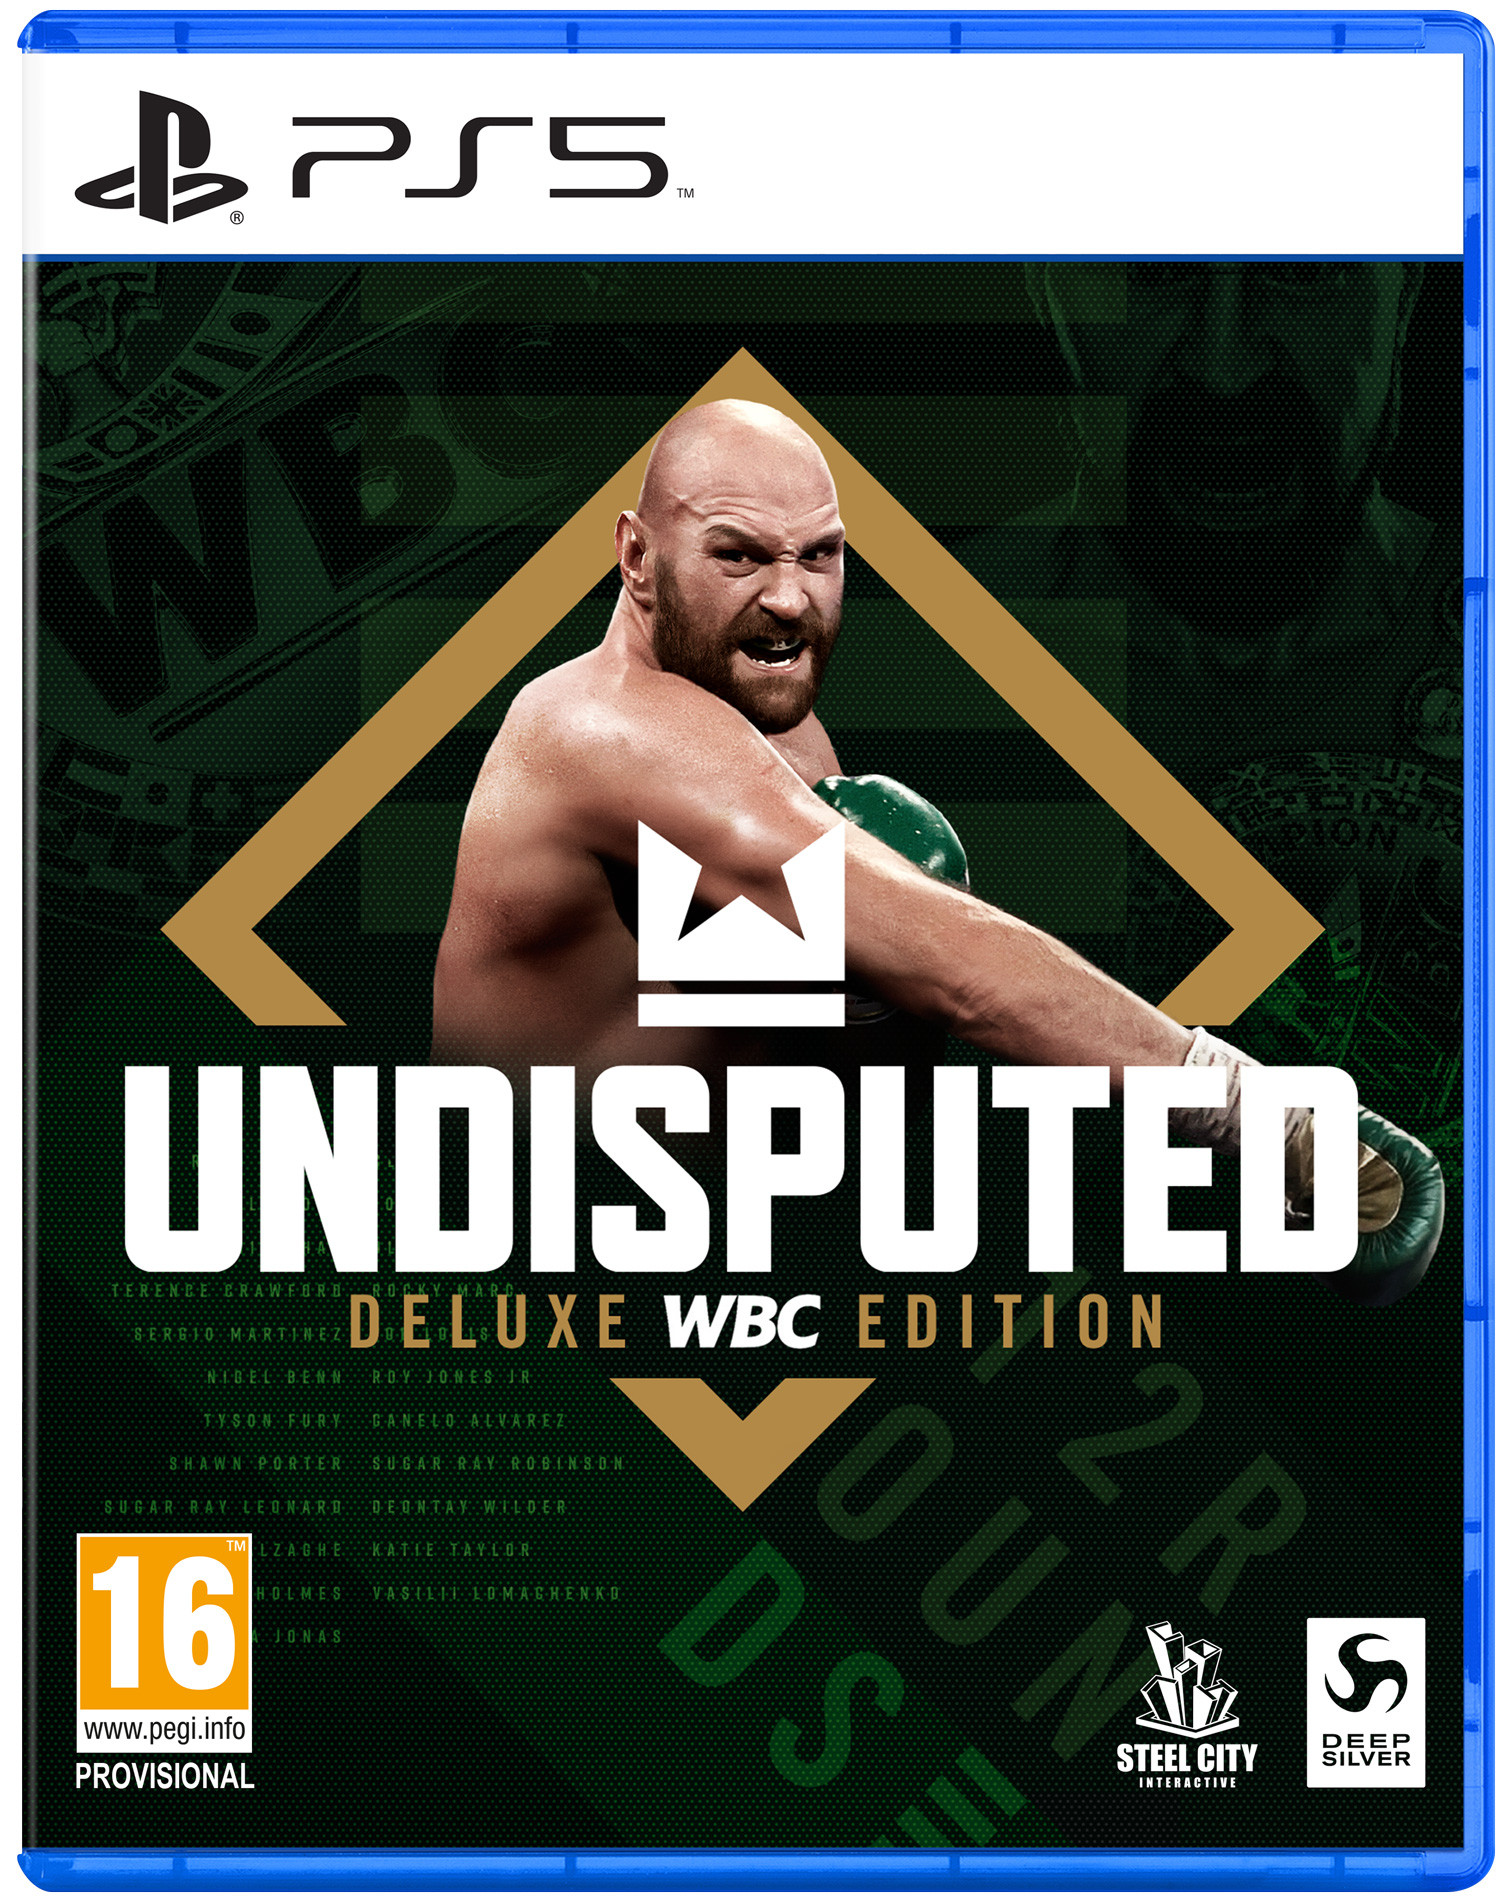 Undisputed - Deluxe WBC Edition